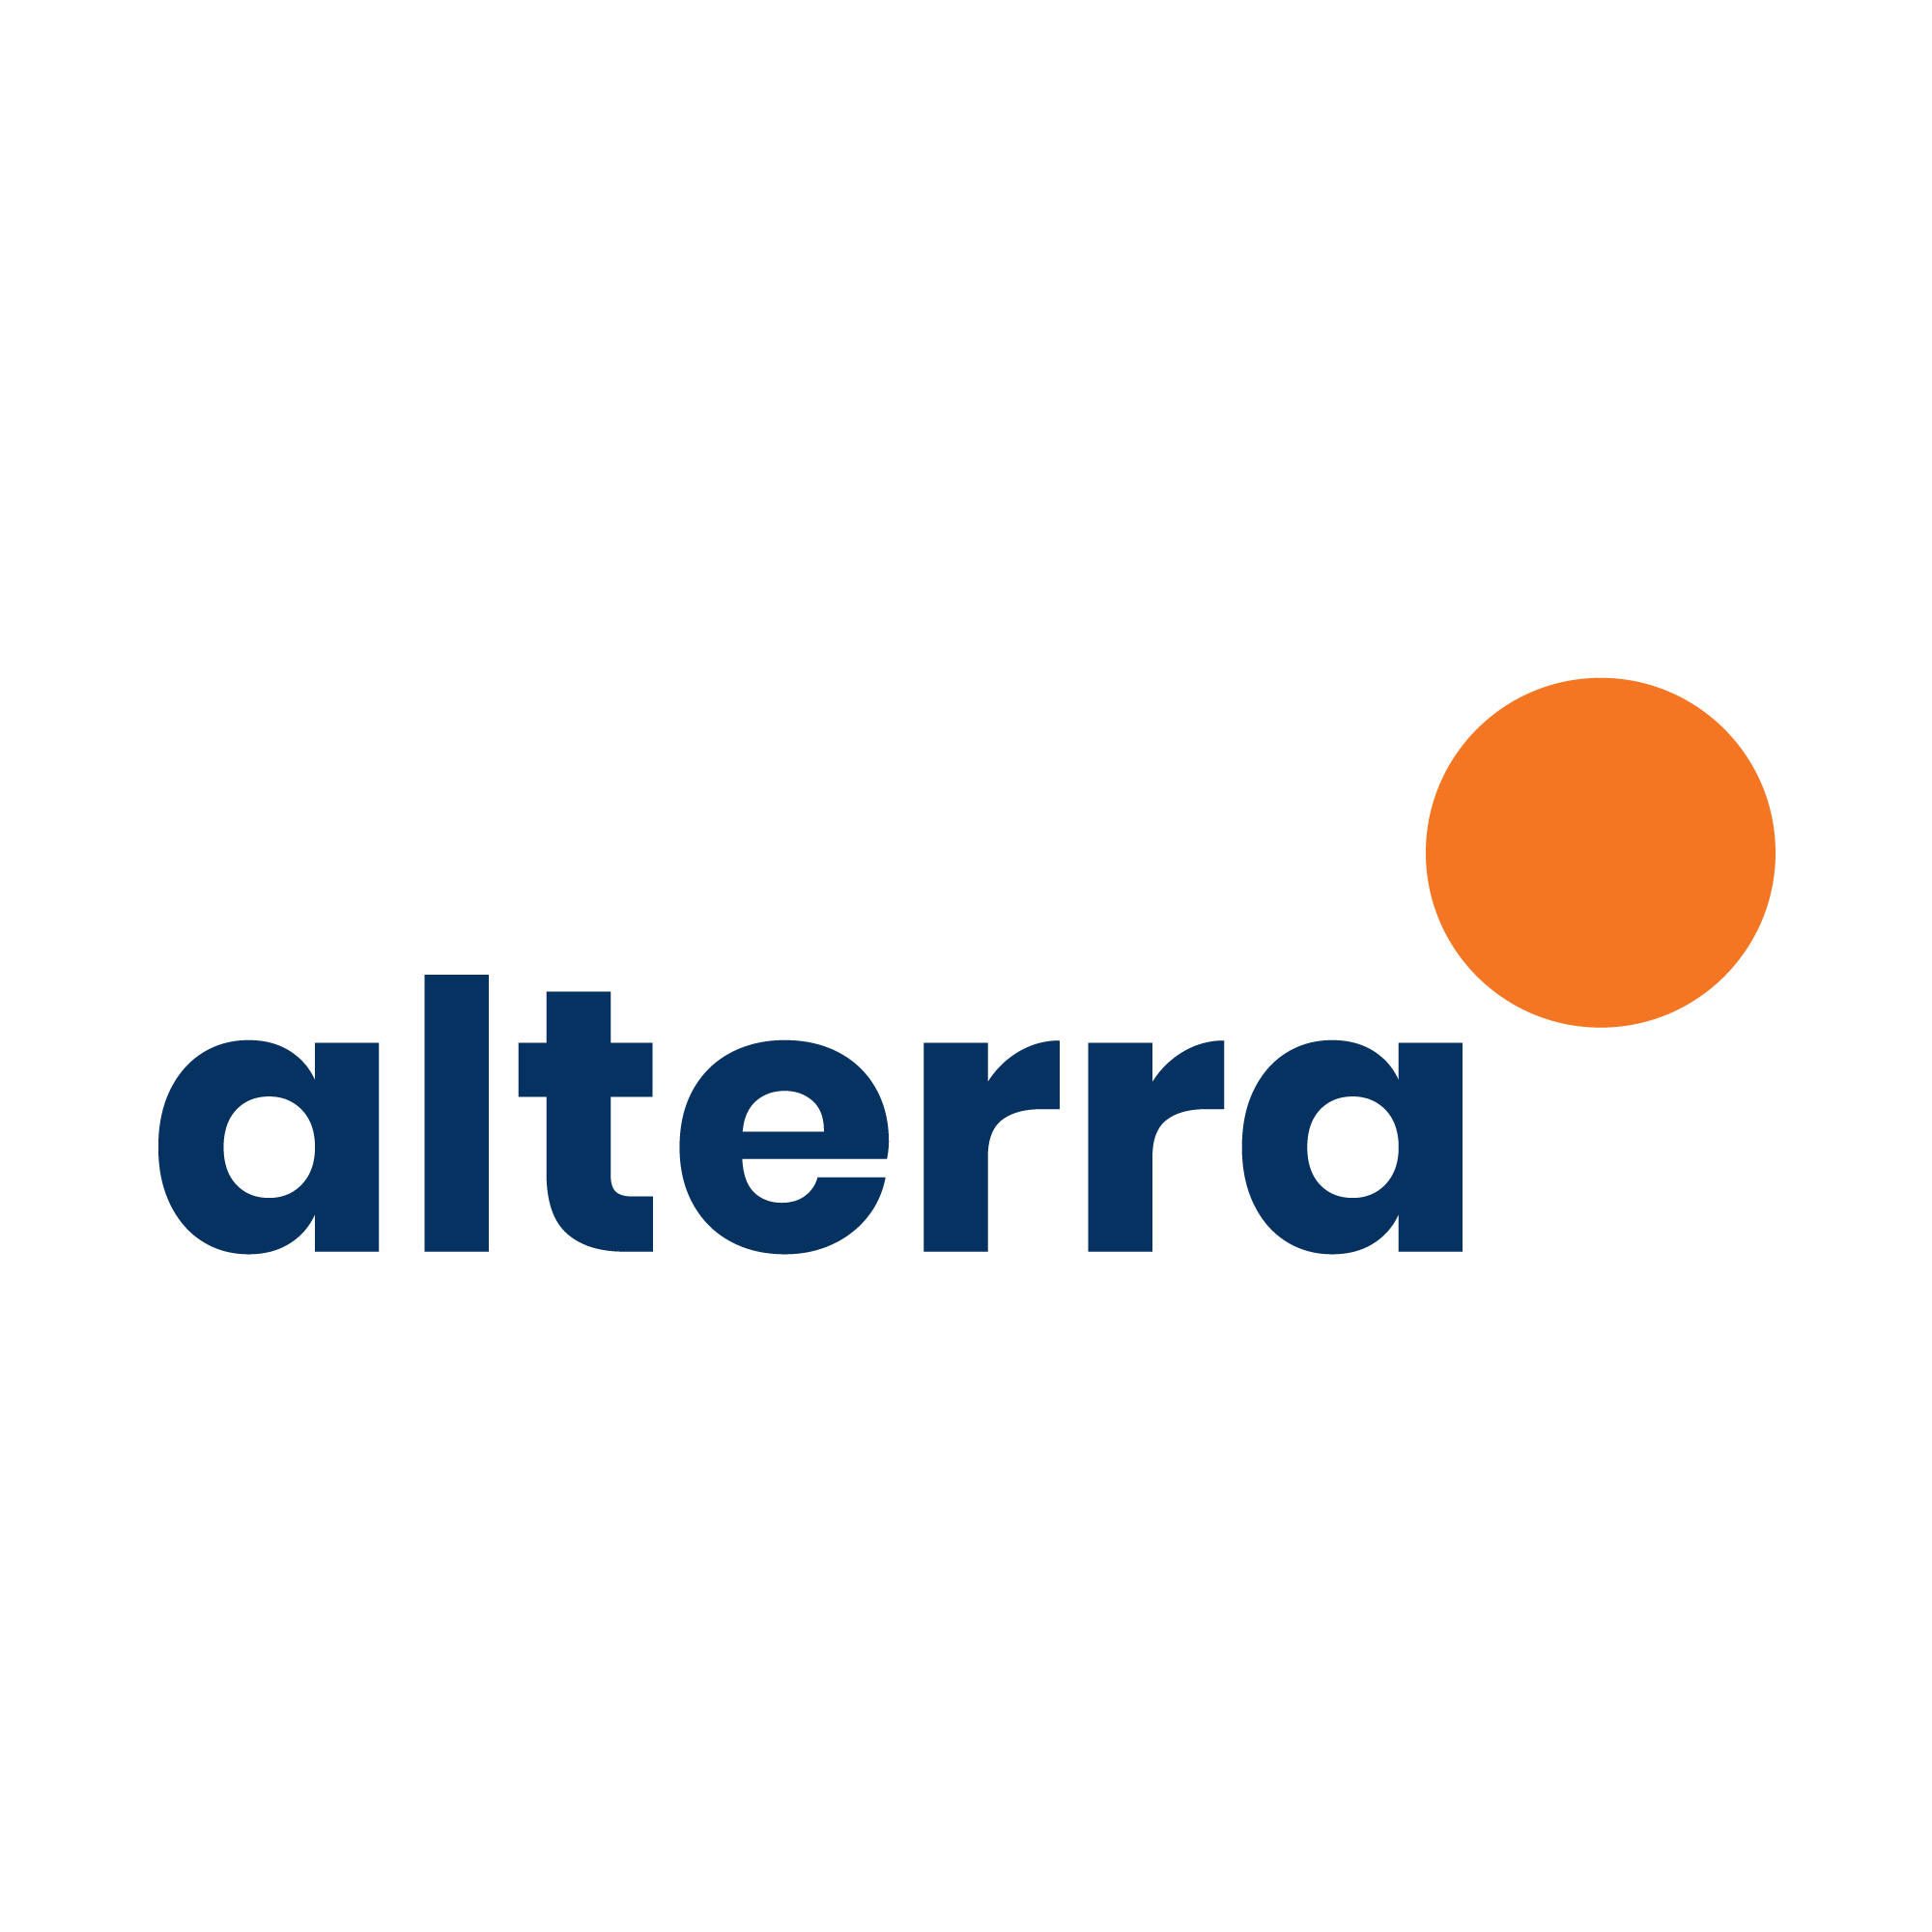 alterra working engineer software expo hackerx jakarta southeast spaces hottest asia company